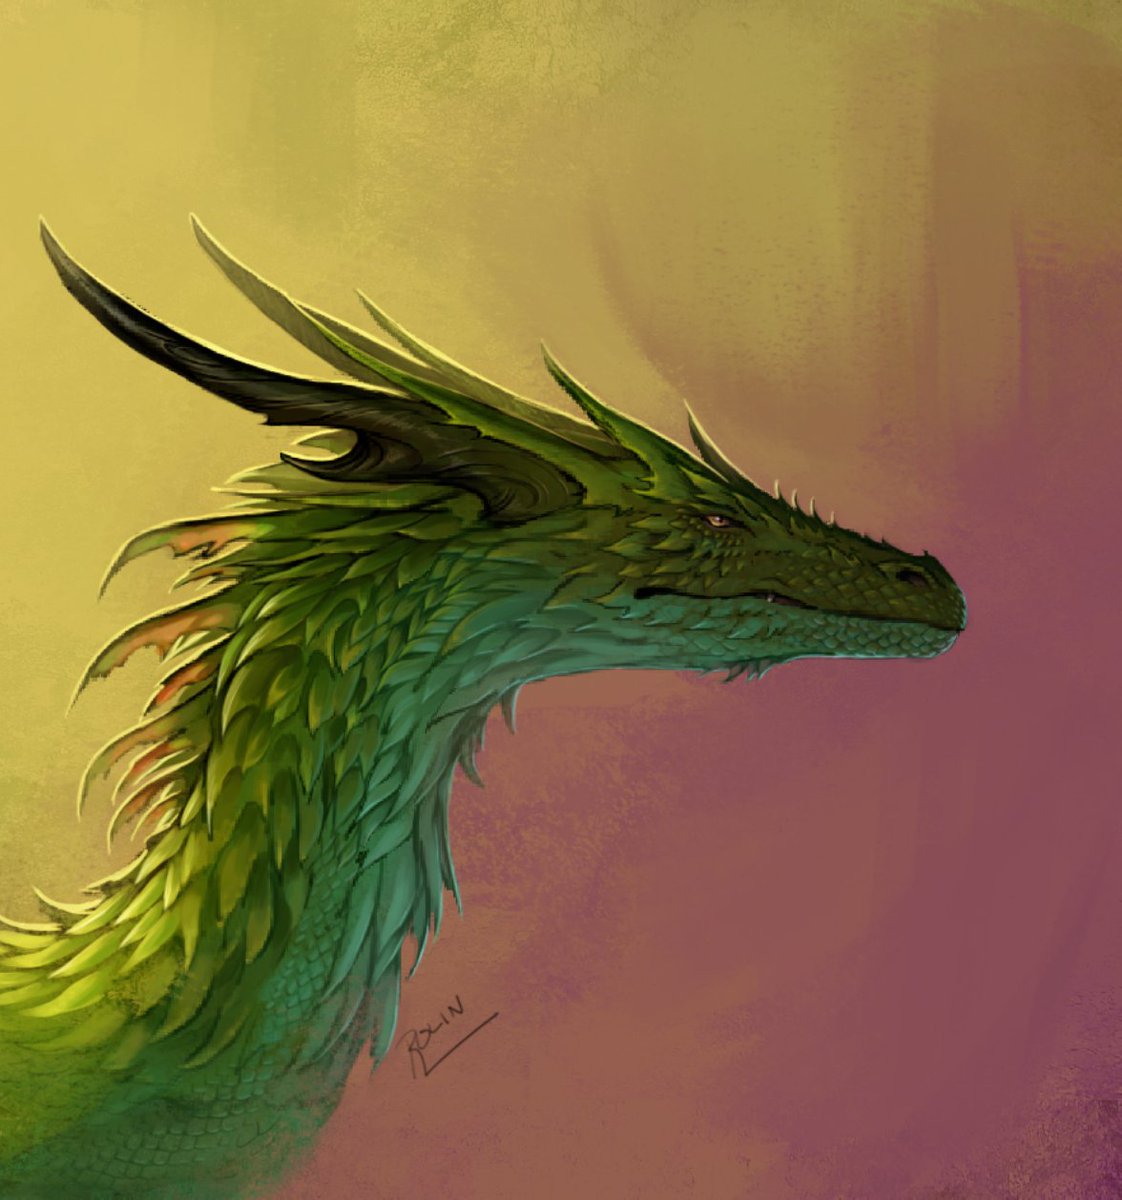 Back to painting practice! I'm doing my best to do some small paintings here and there to keep up my skills while I work on other projects behind the scenes (NDA sorry)
_
_
_
#dragons #portraits #fantasypainting #paintings